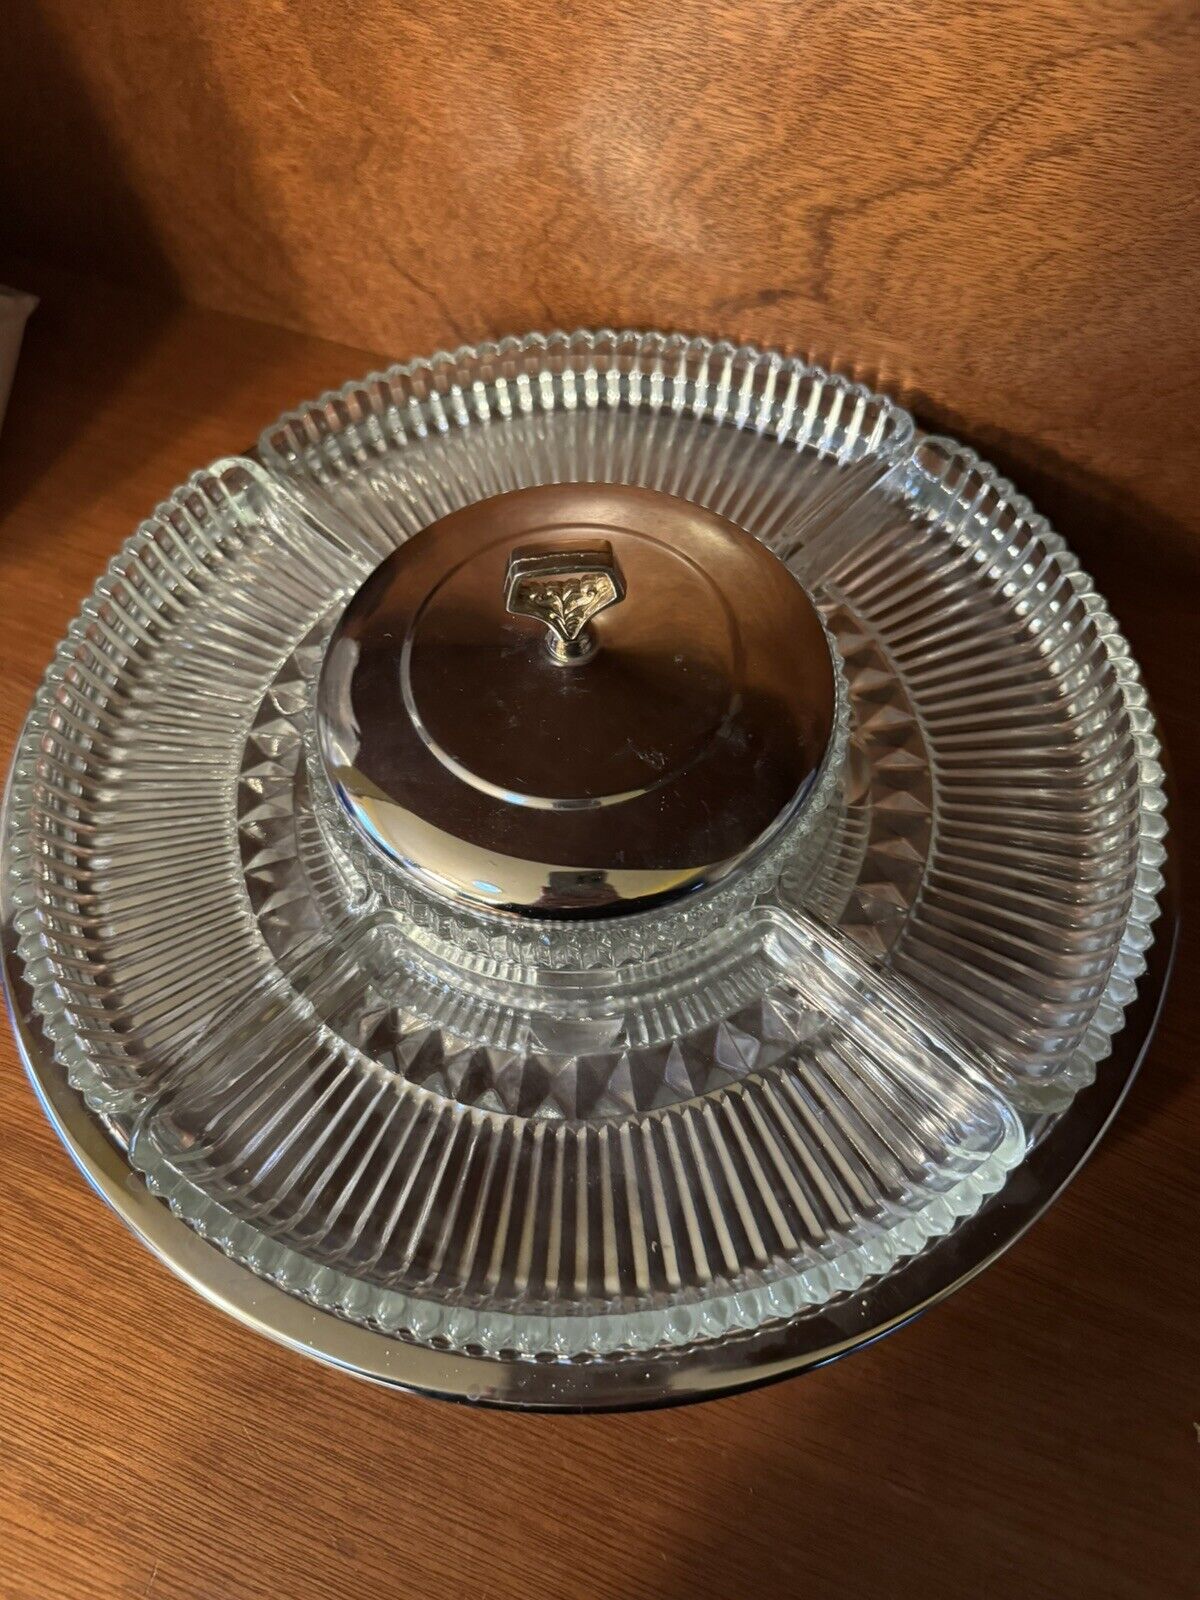 Vintage Kromex Lazy Susan Chrome Tray with 5 Glass Inserts No Chips Or Scratches